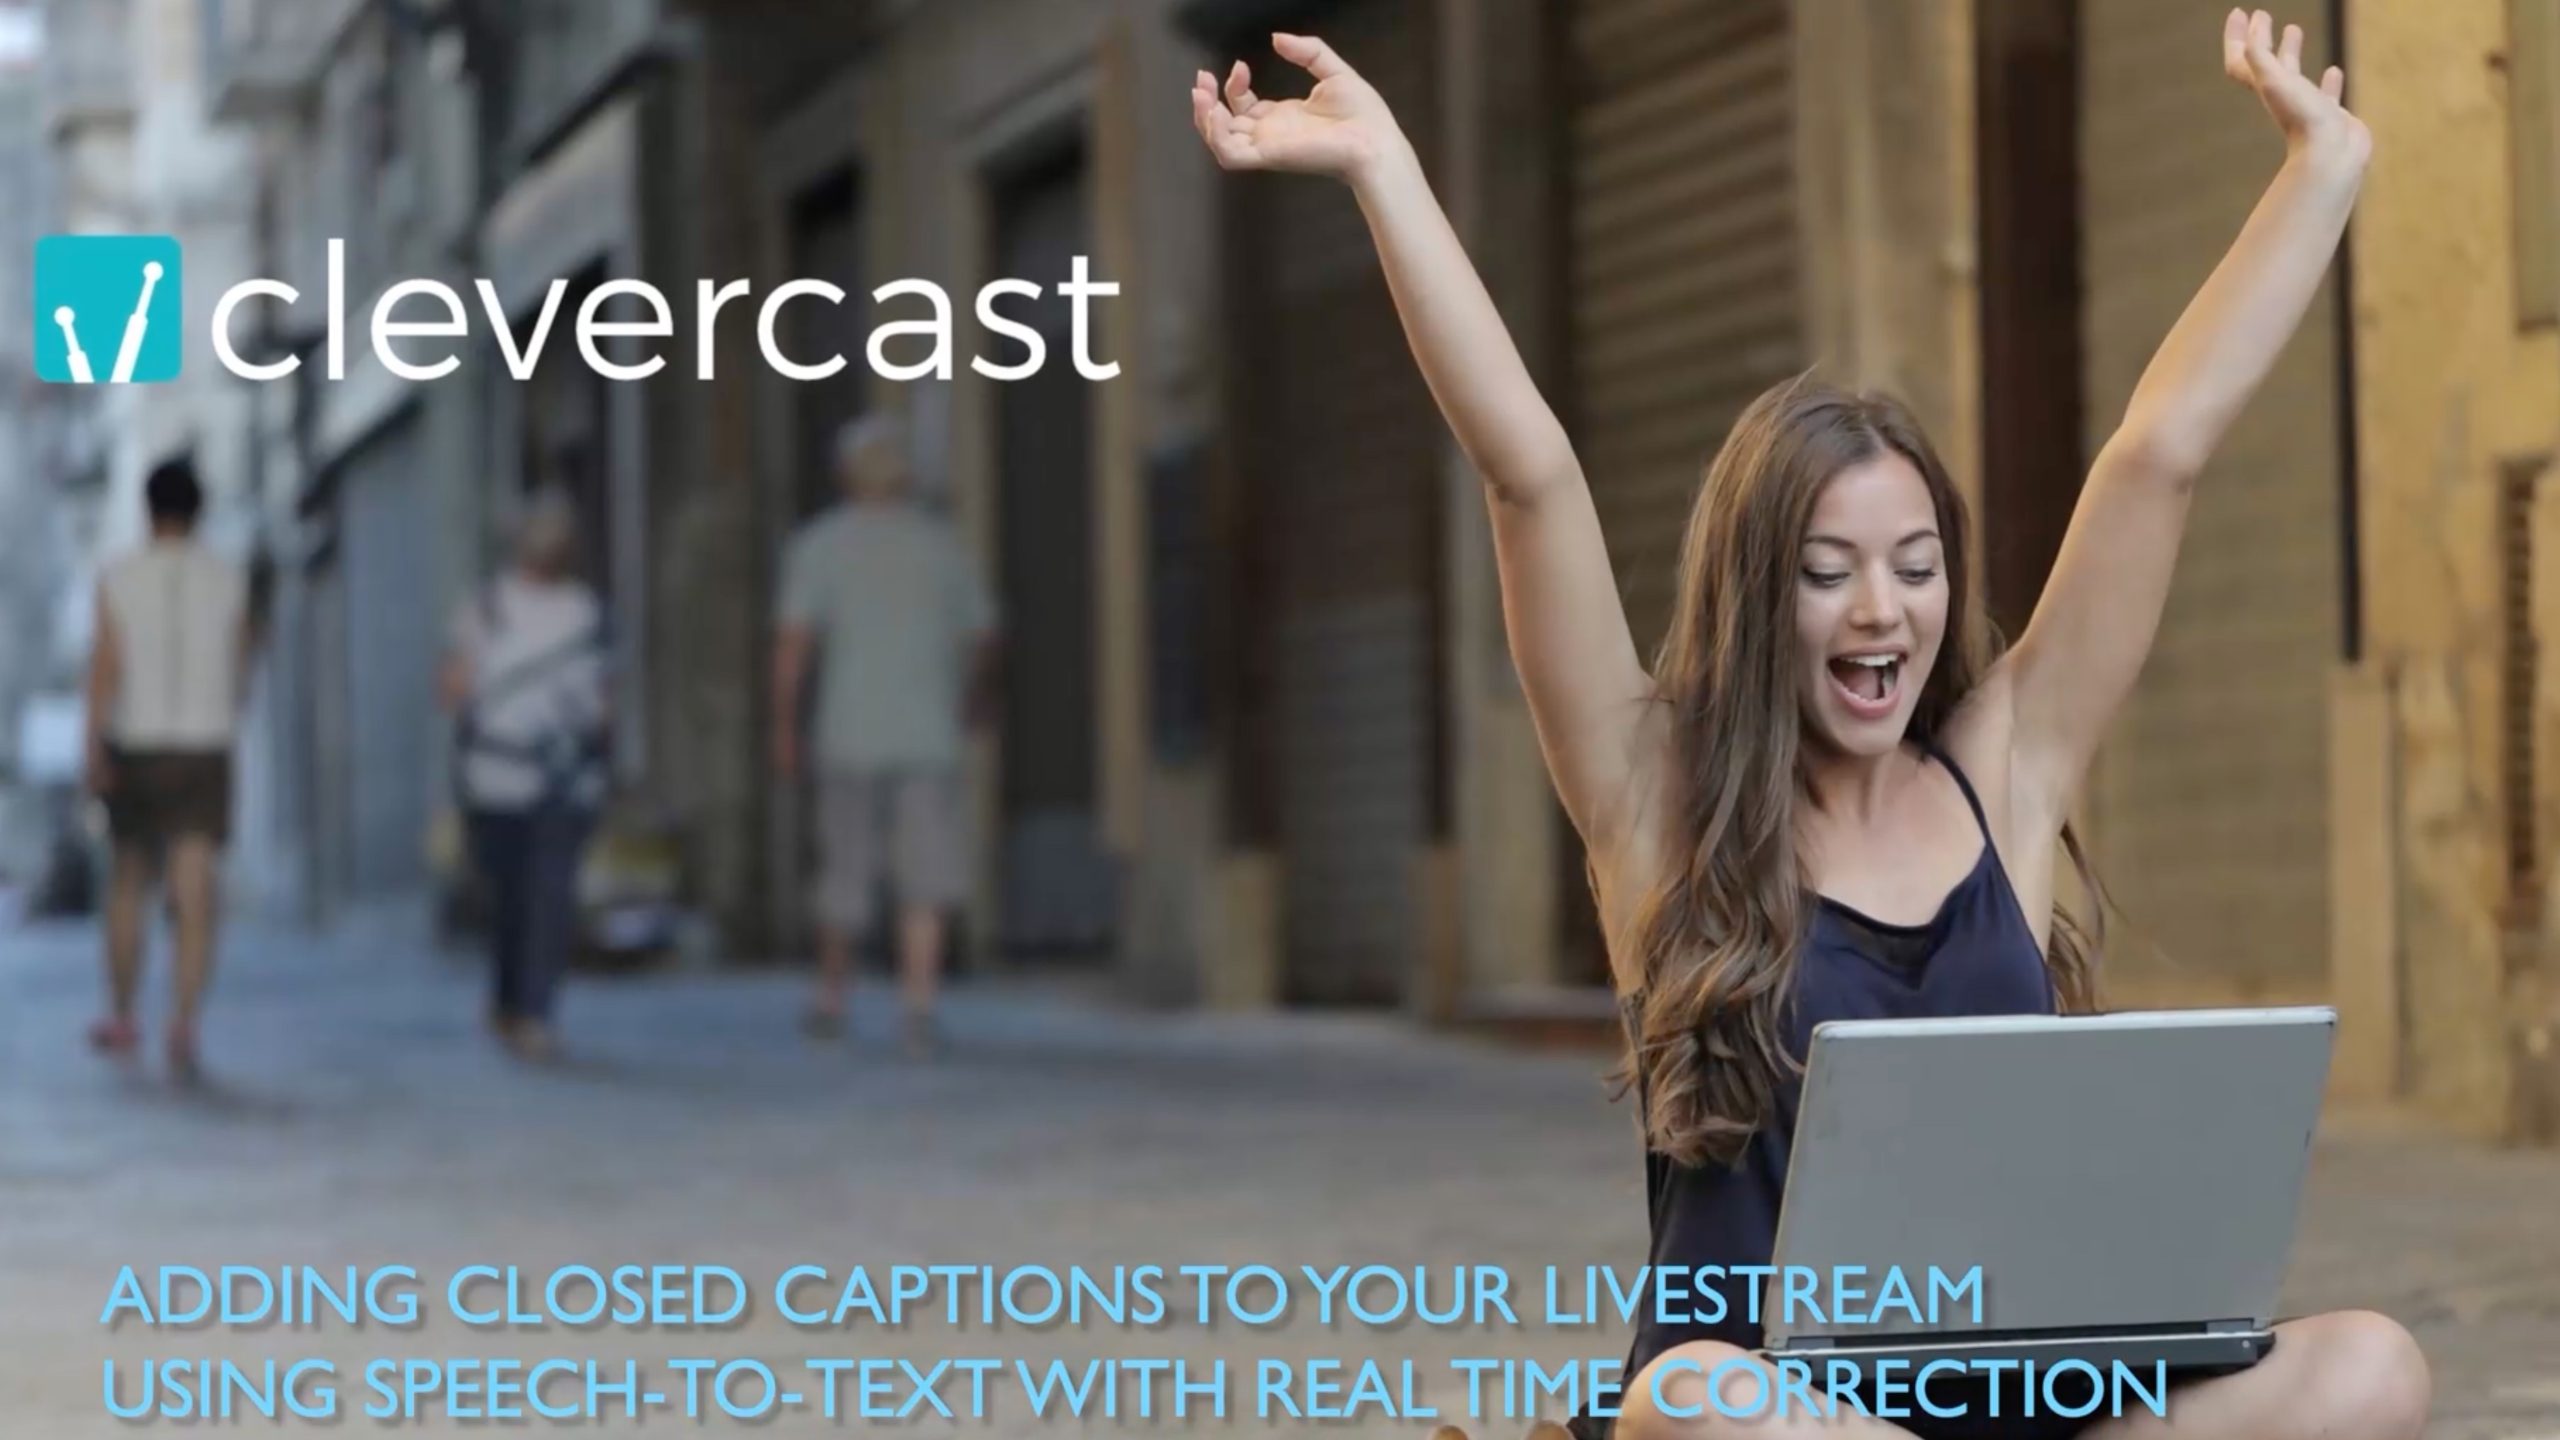 Adding closed captions to your live stream through speech-to-text with correction